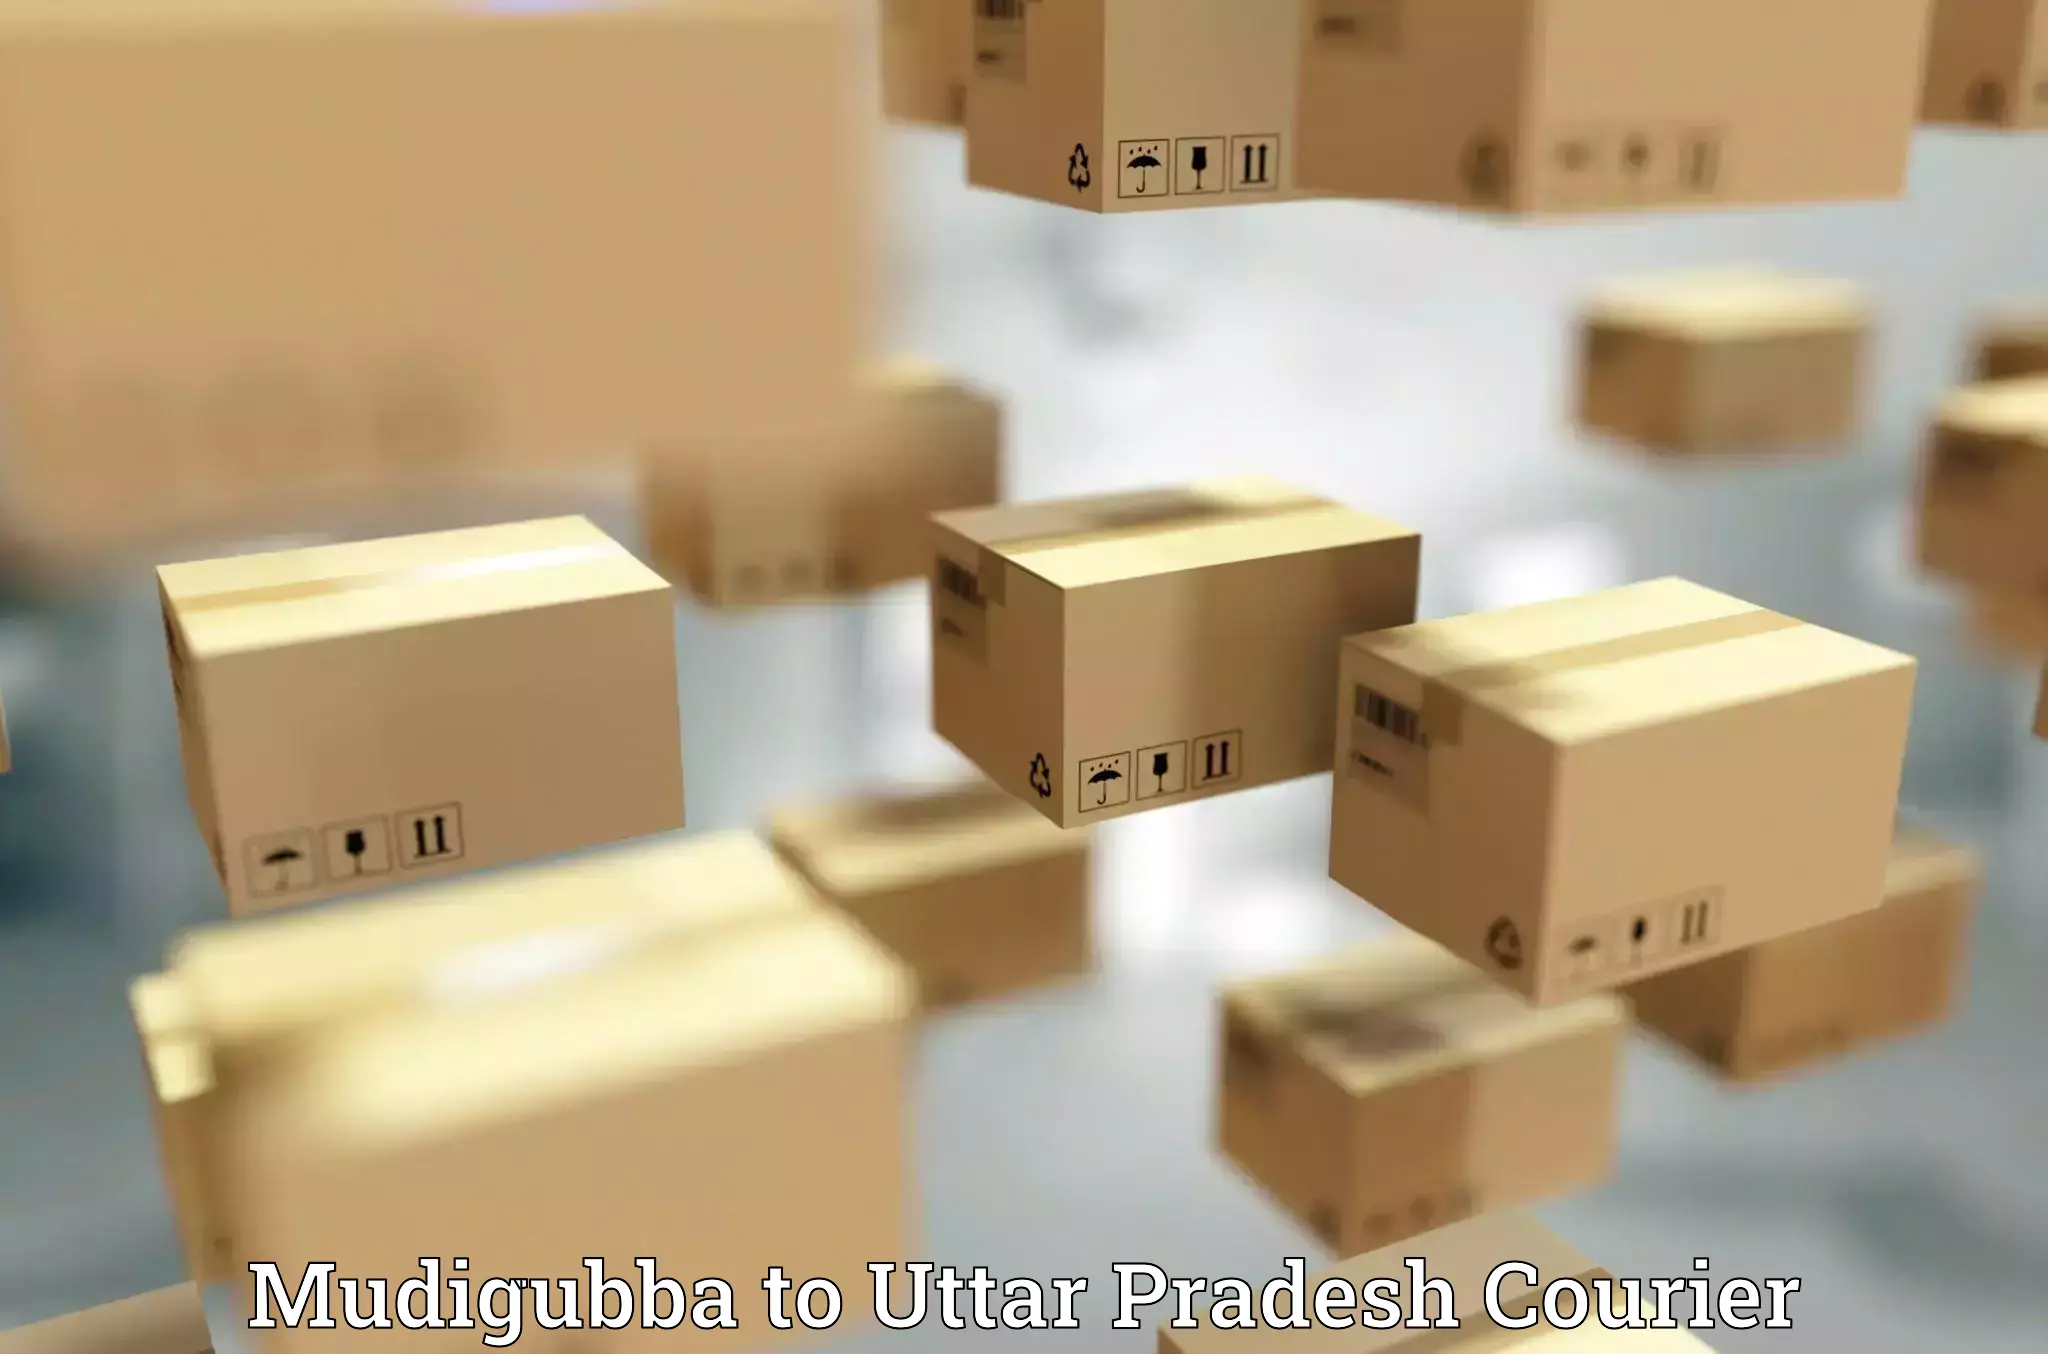 Tech-enabled shipping Mudigubba to Agra